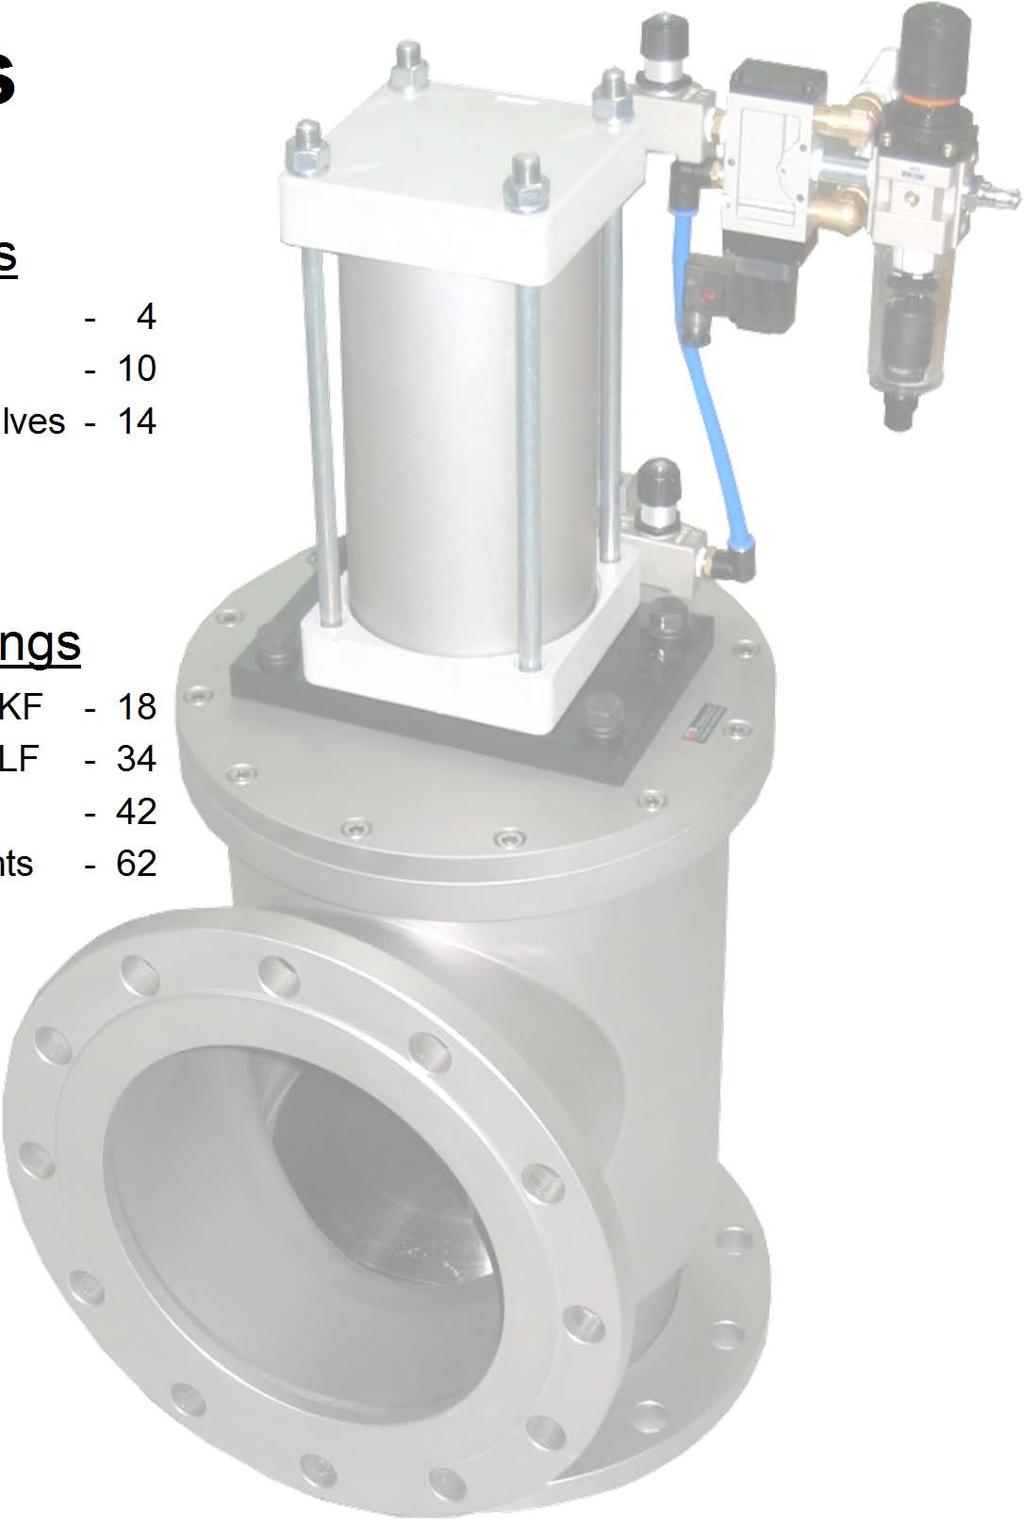 Contents 1 Vacuum valves Angle Valves - 4 Inline Valves - 10 Butterfly & Check Valves - 14 2 s &